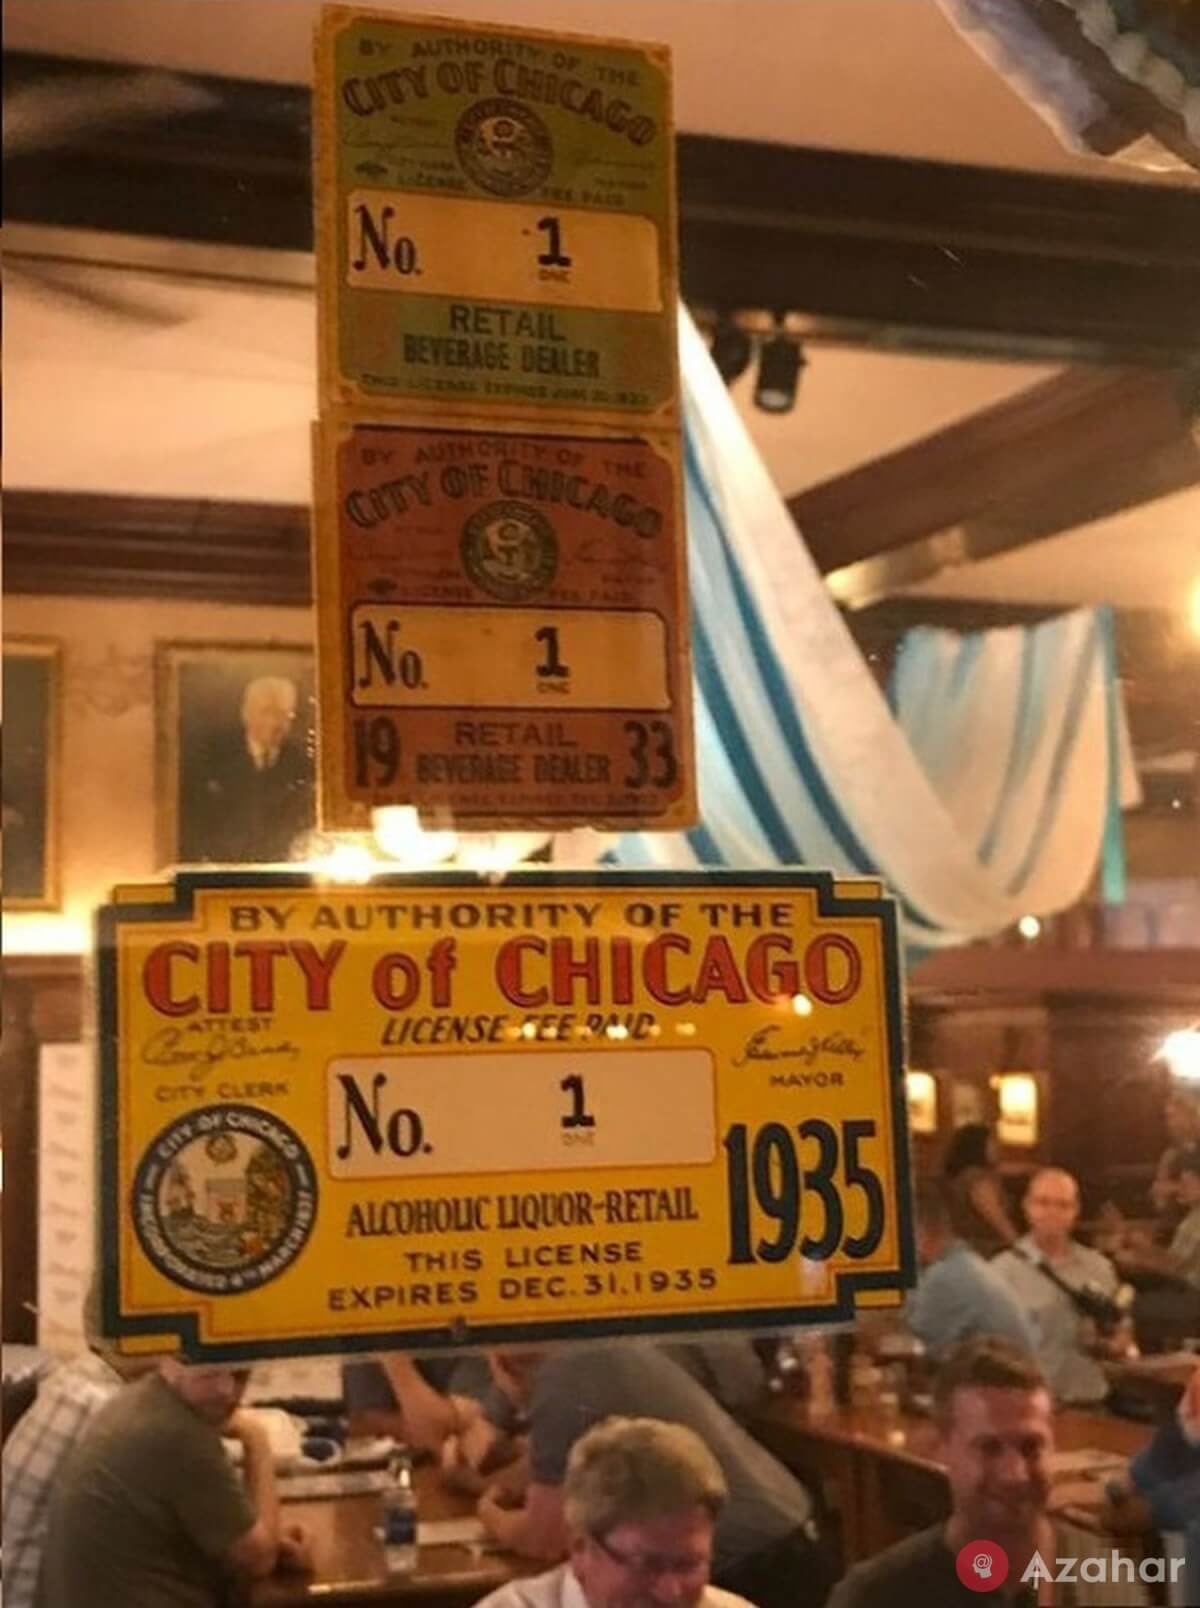 A bar in Chicago that was the very first to receive a license to sell alcohol after the repeal of Prohibition